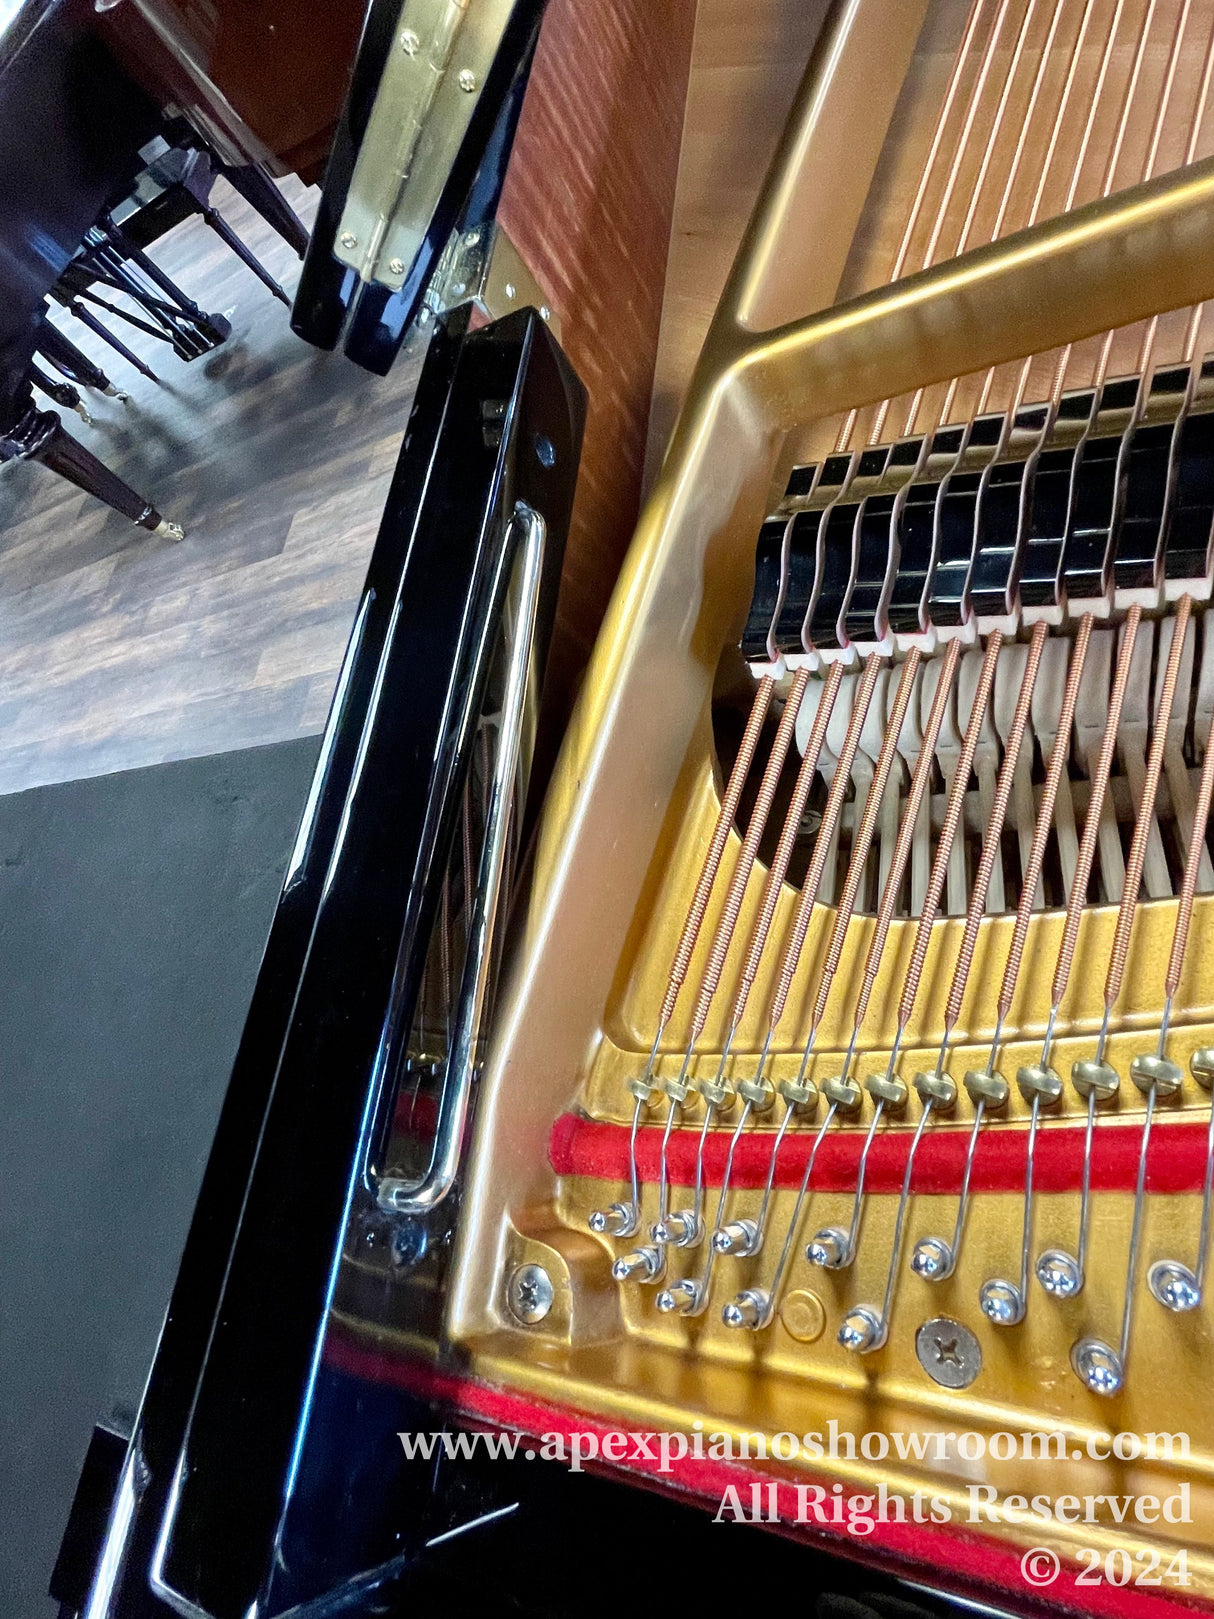 Close-up view of a grand pianos interior, showing the gold-painted frame, high-tension strings, and tuning pins with a reflective black finish on casing — an intricate look at the craftsmanship of a piano.